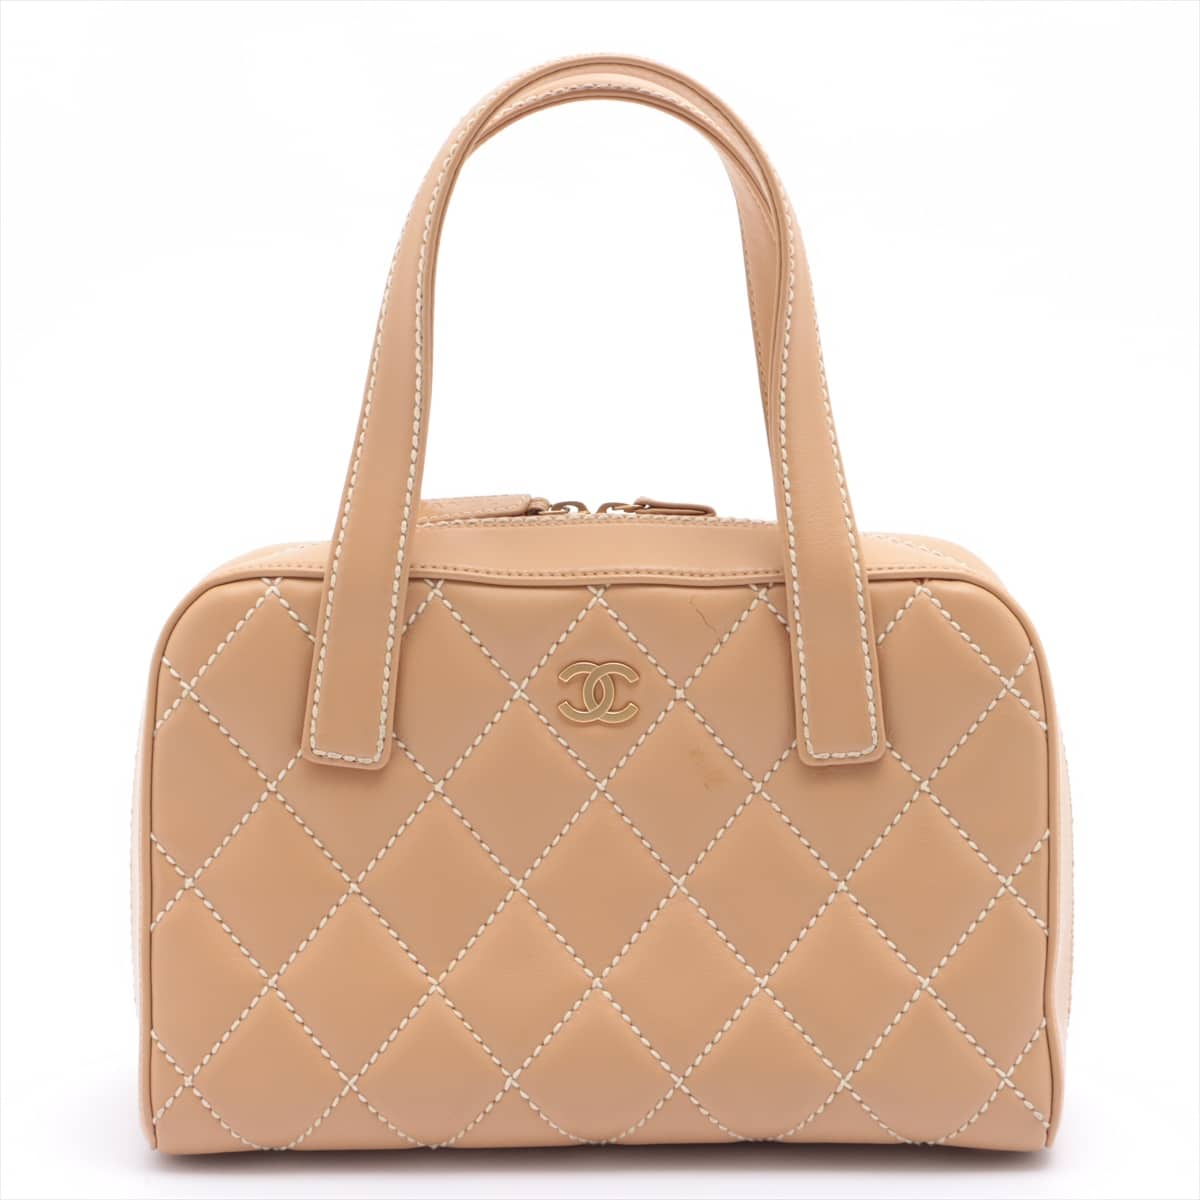 Chanel Wild Stitch Leather Hand bag Beige Gold Metal fittings 8XXXXXX Comes with divider pouch